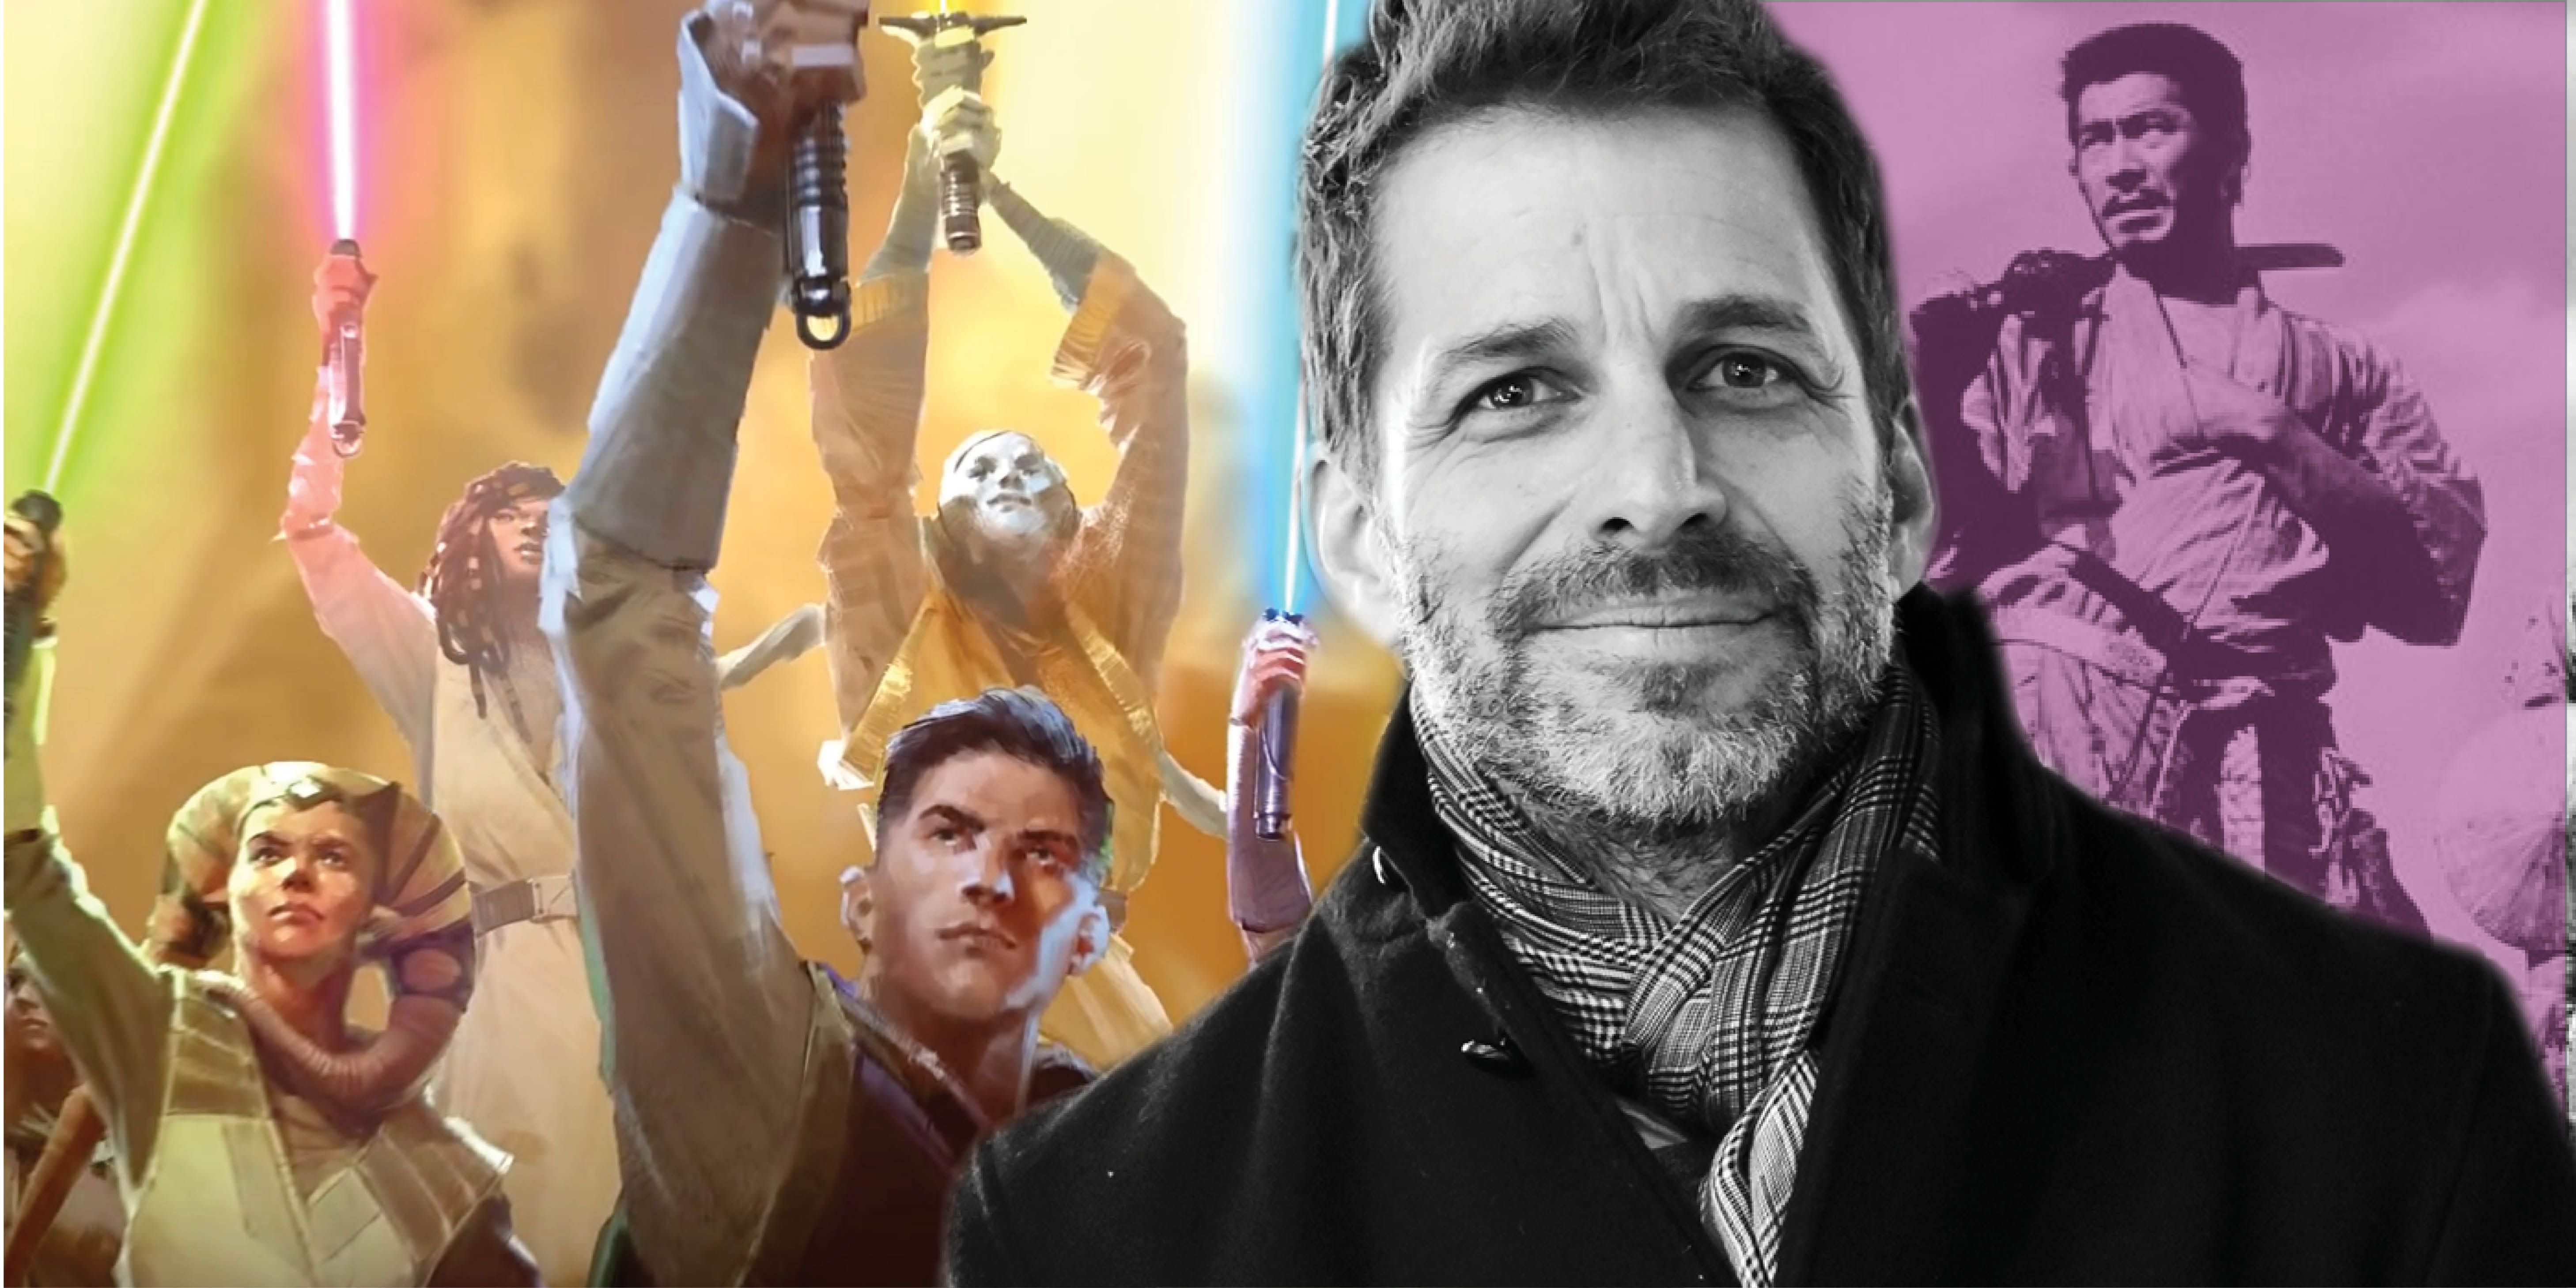 Zack Snyder in front of Star Wars Jedi Knights and Samurai